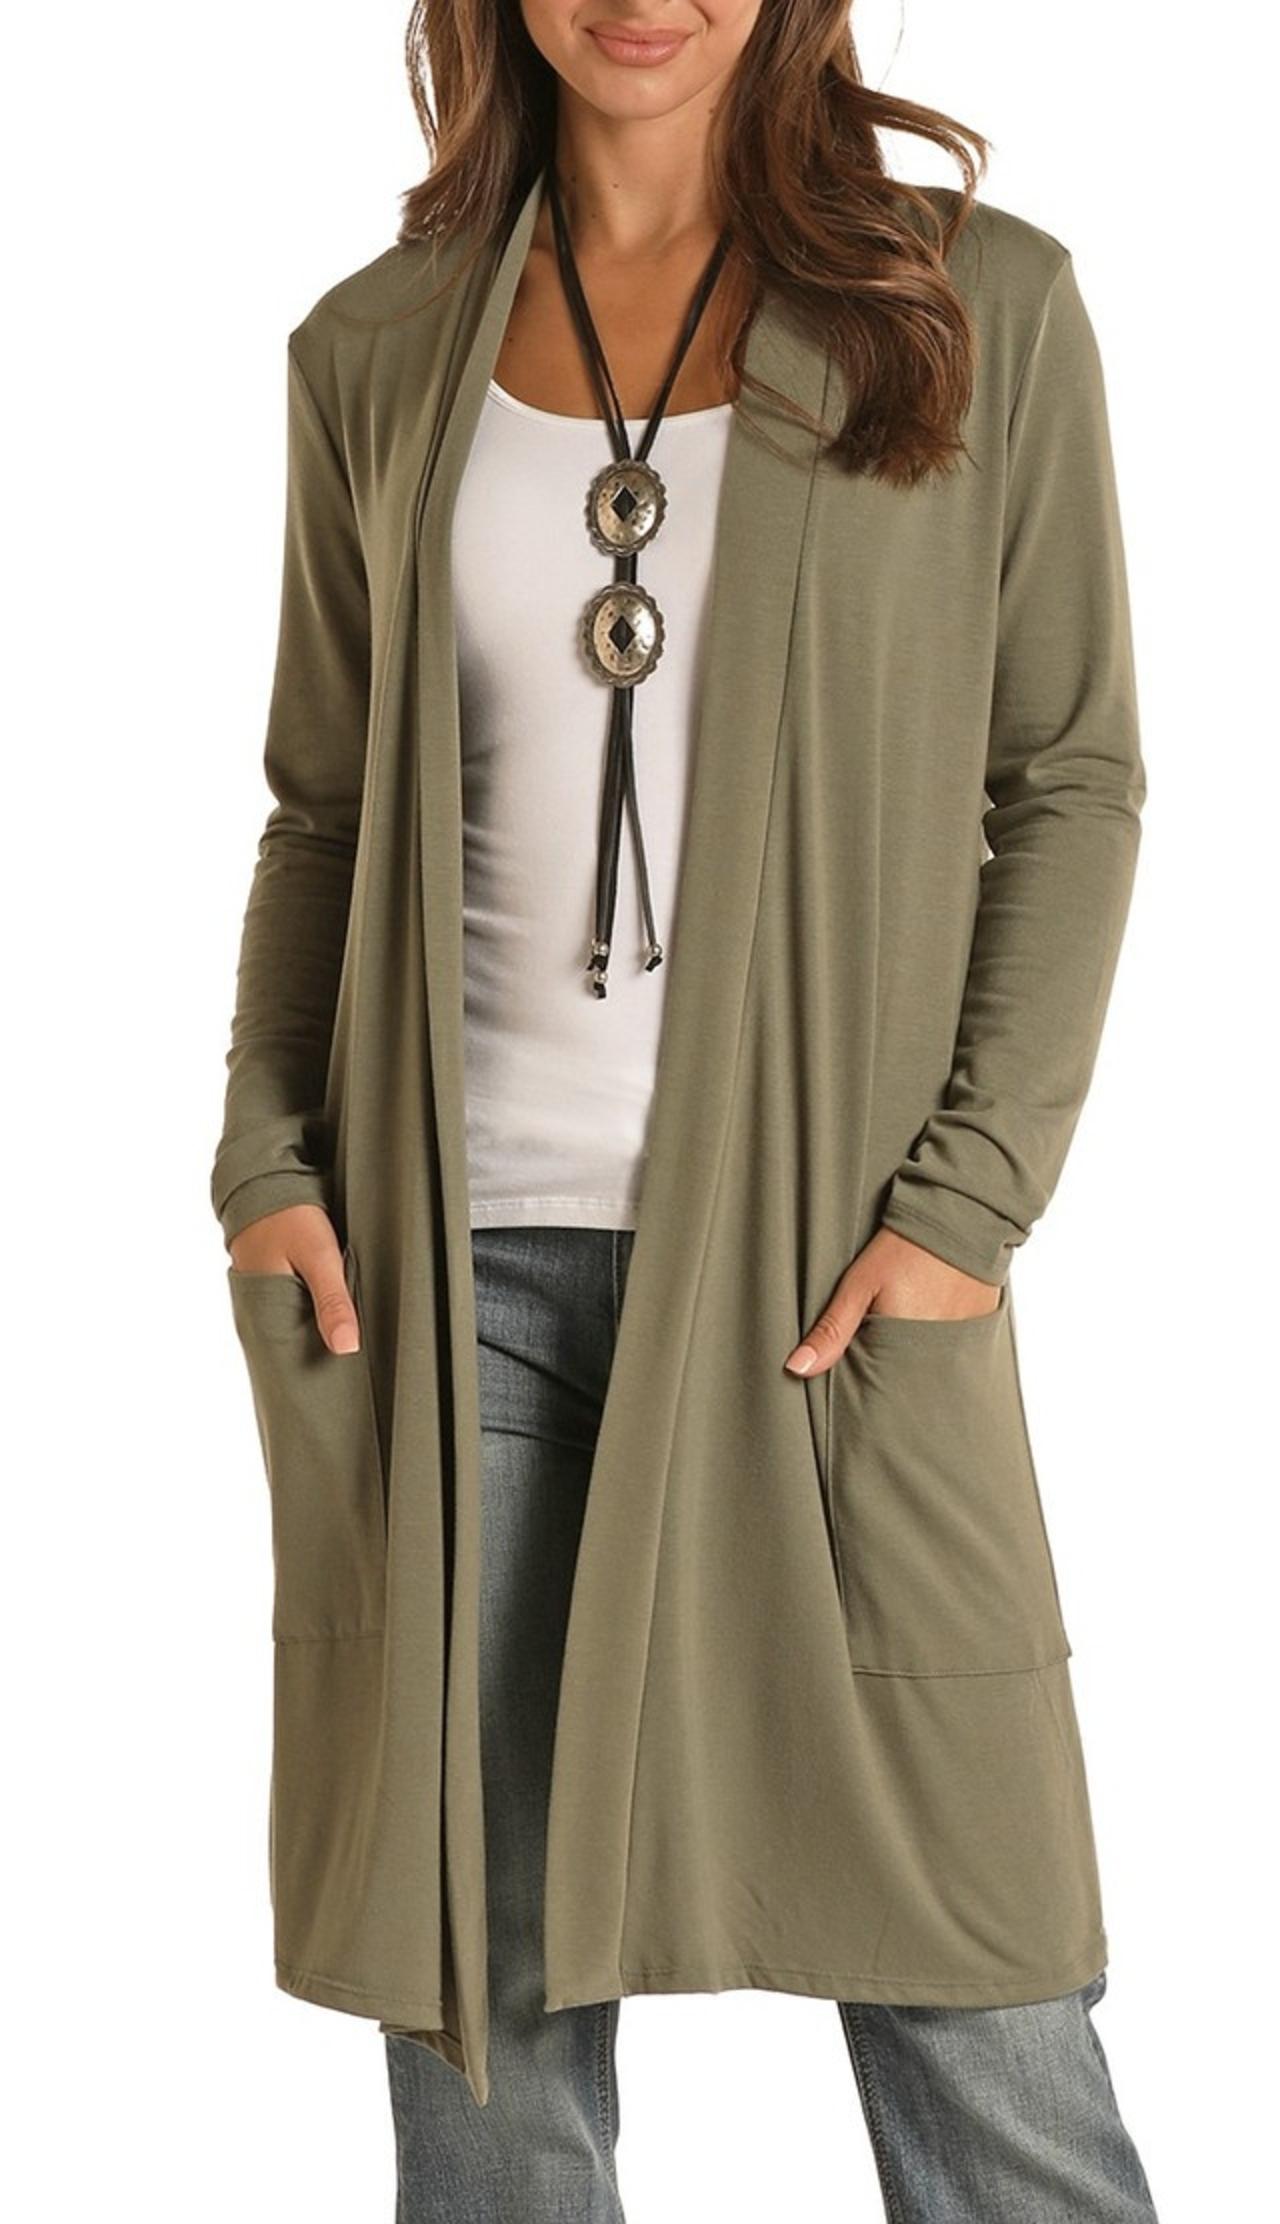 Panhandle Solid Knit Duster olive front view